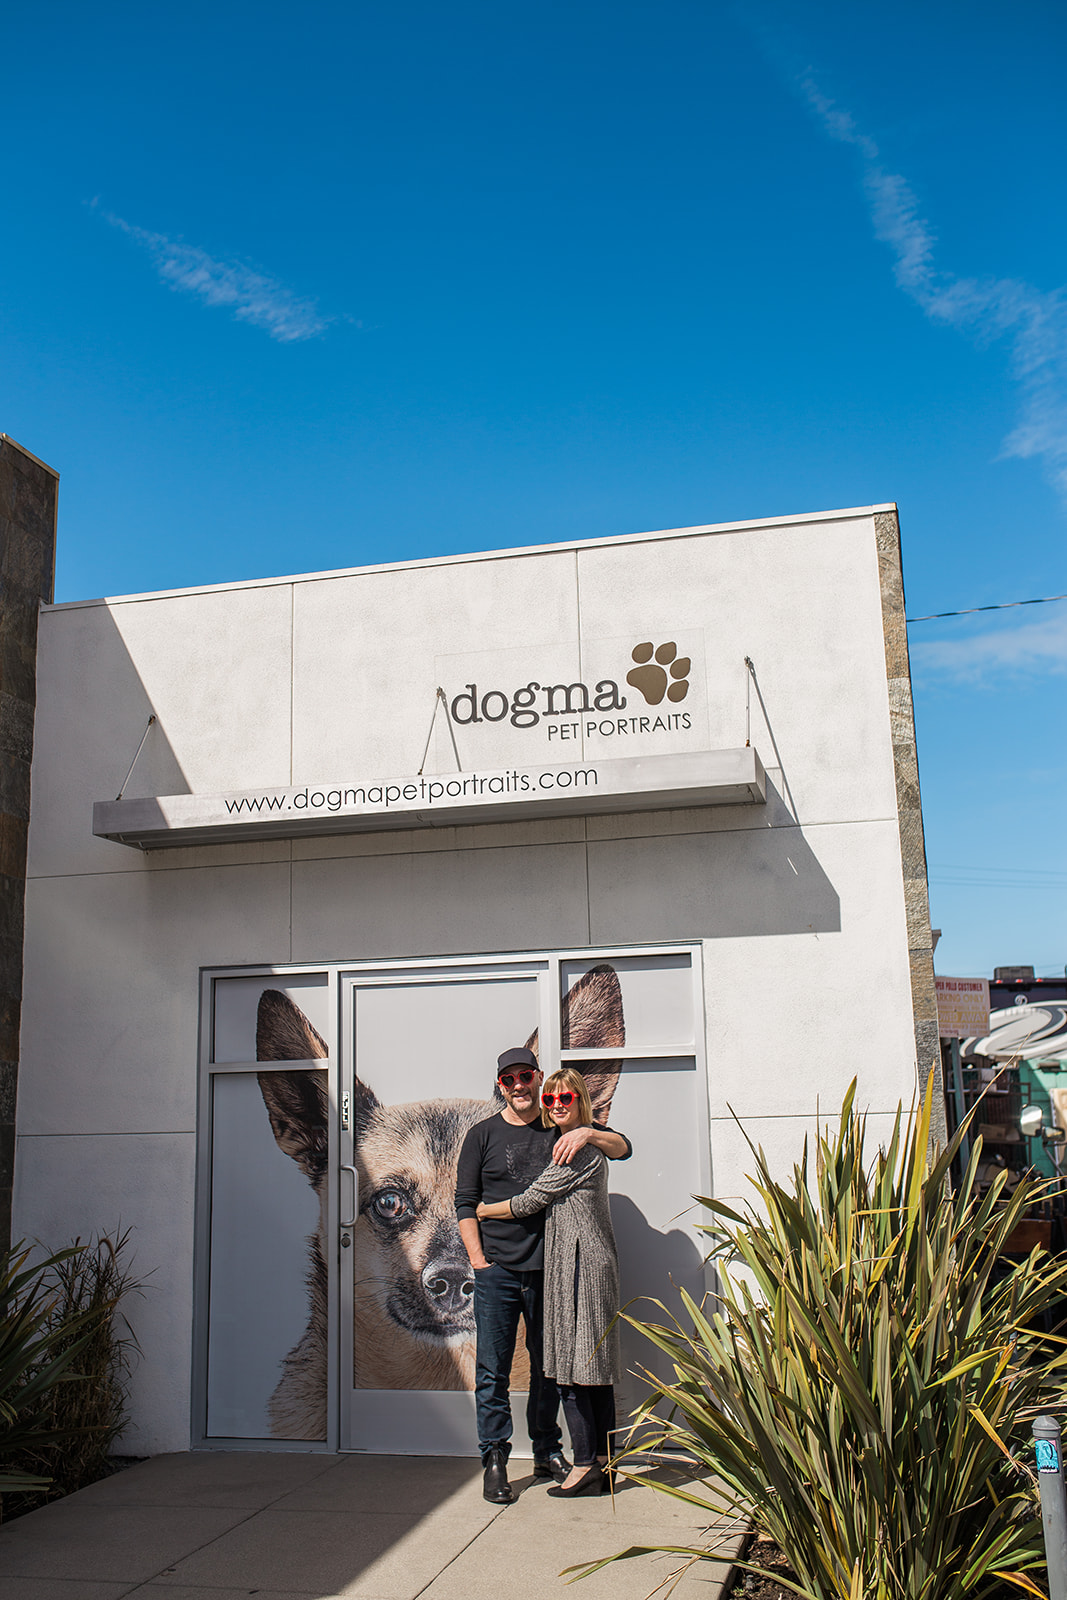 Thank you, David and Sylvaine Capron, from Dogma Pet Portraits, for sharing your story with I Heart Costa Mesa!